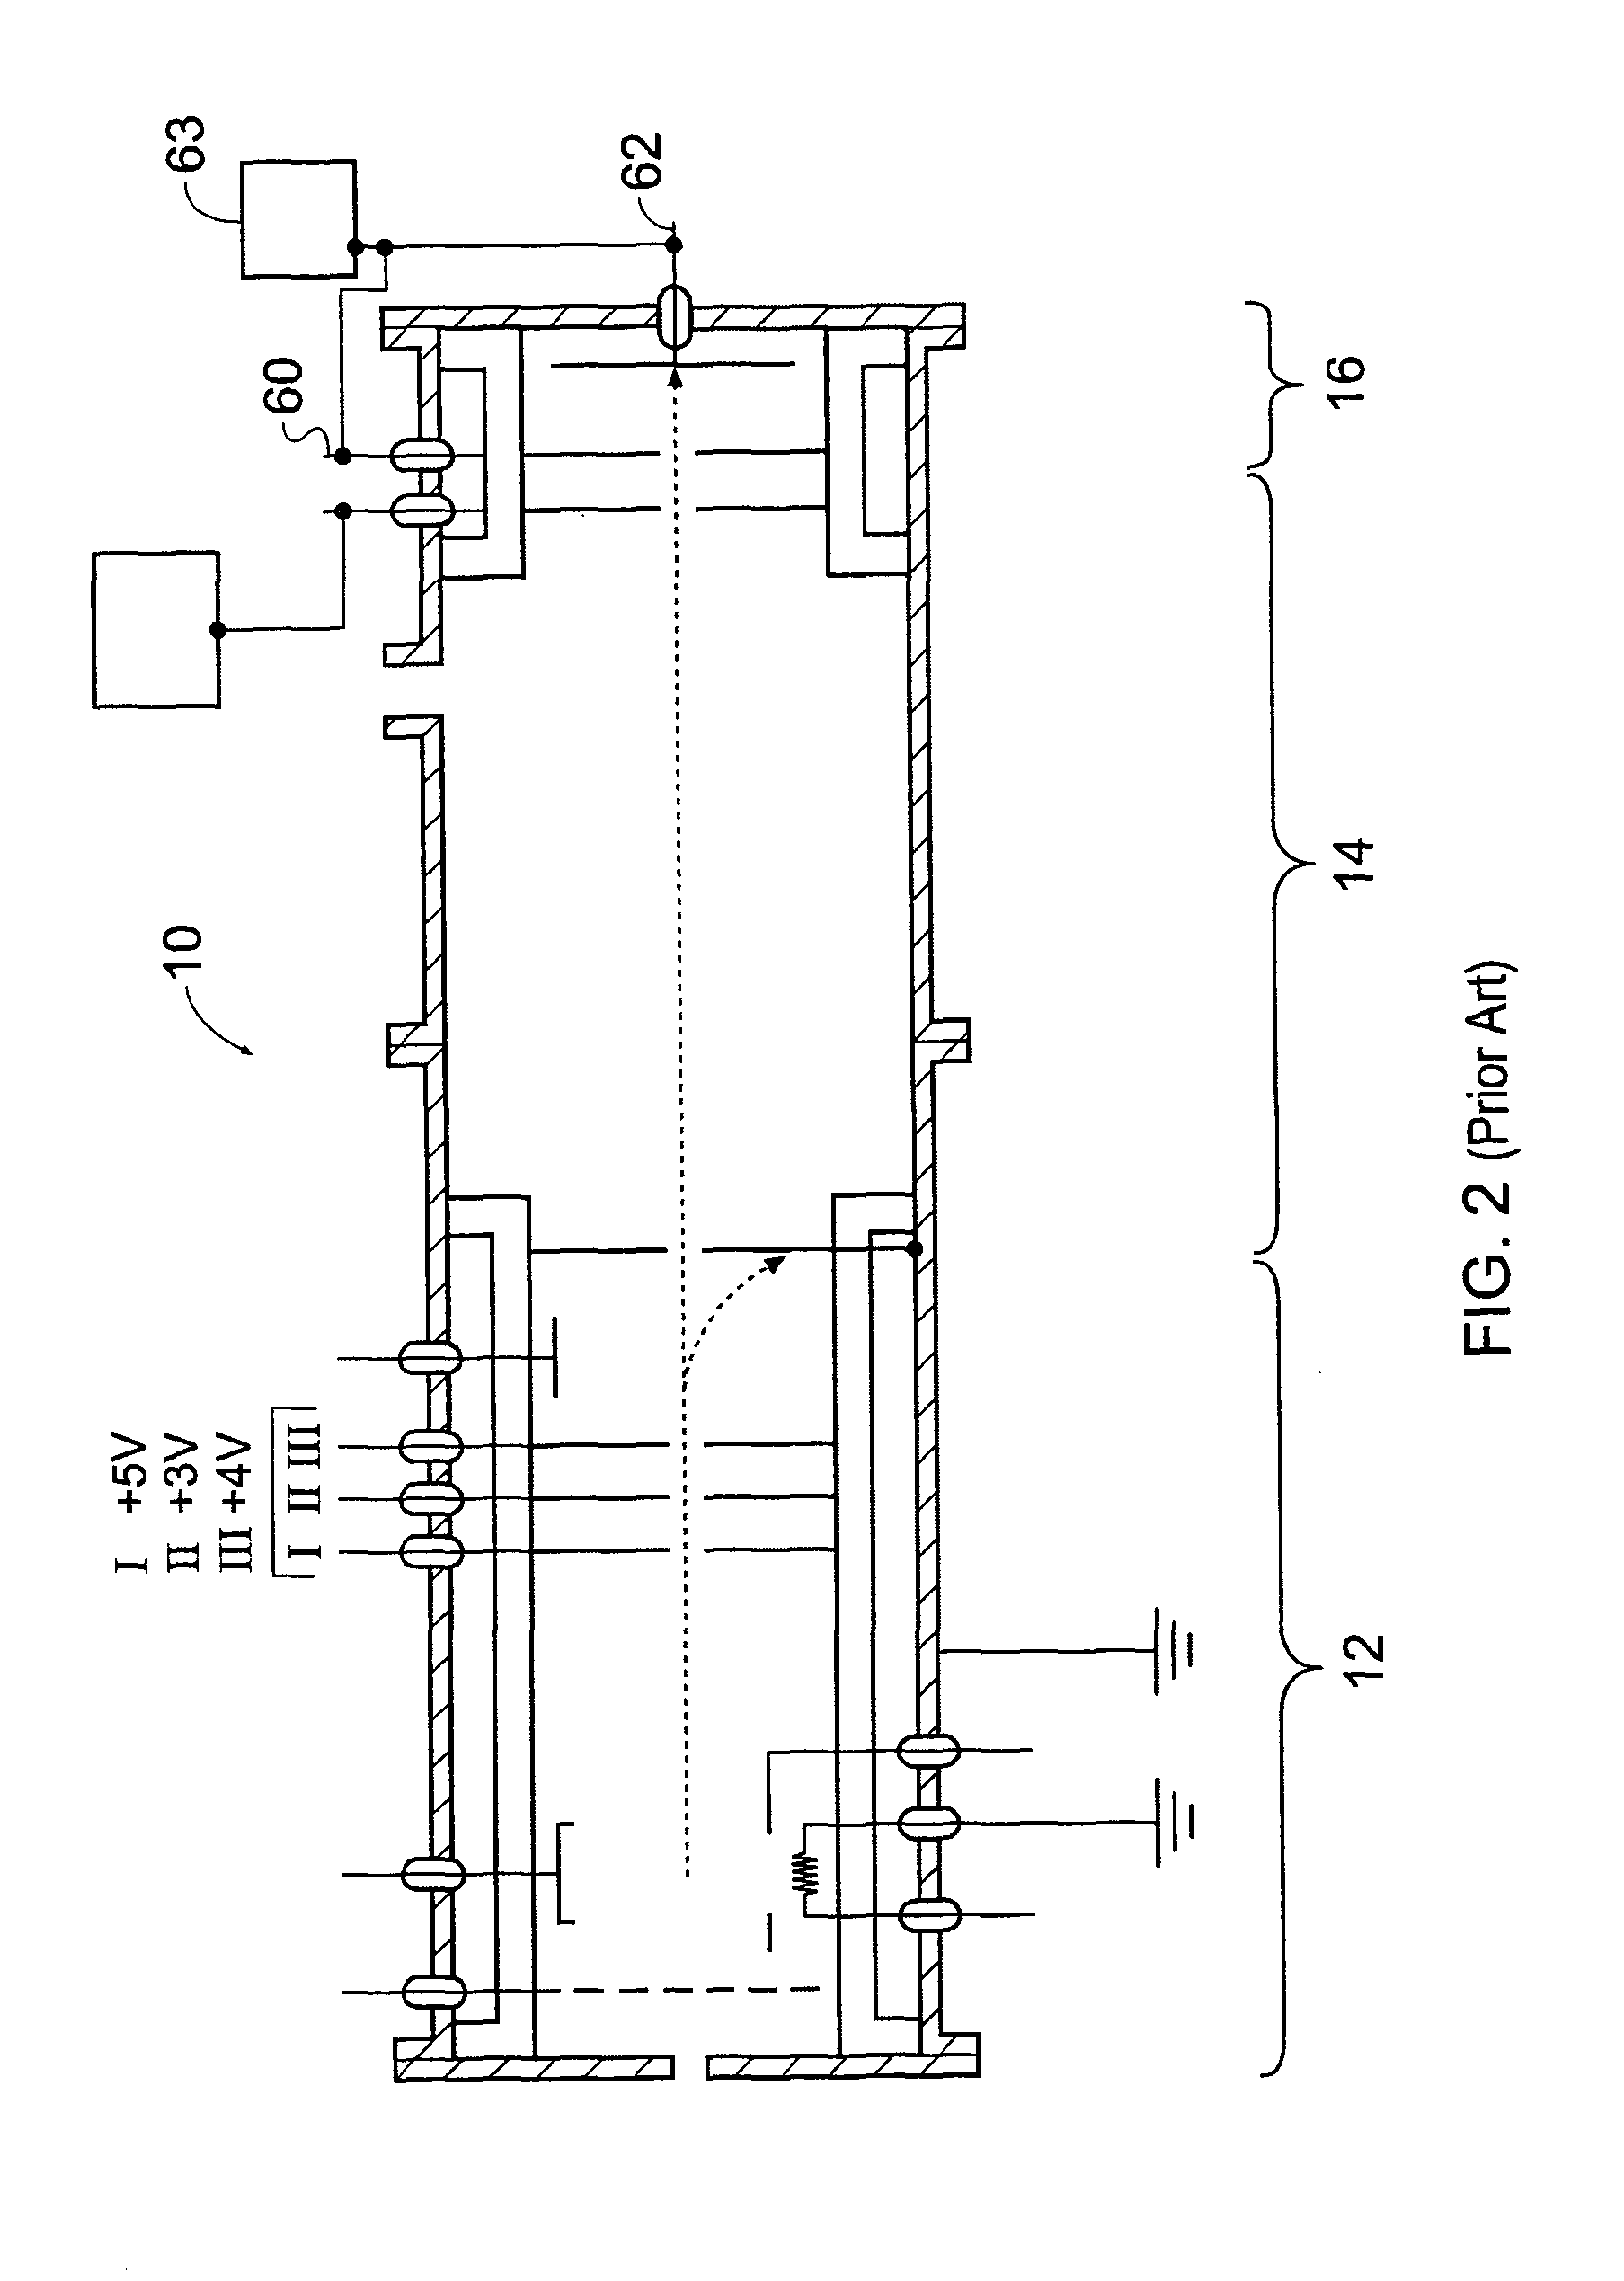 Mass spectrometers and methods of ion separation and detection